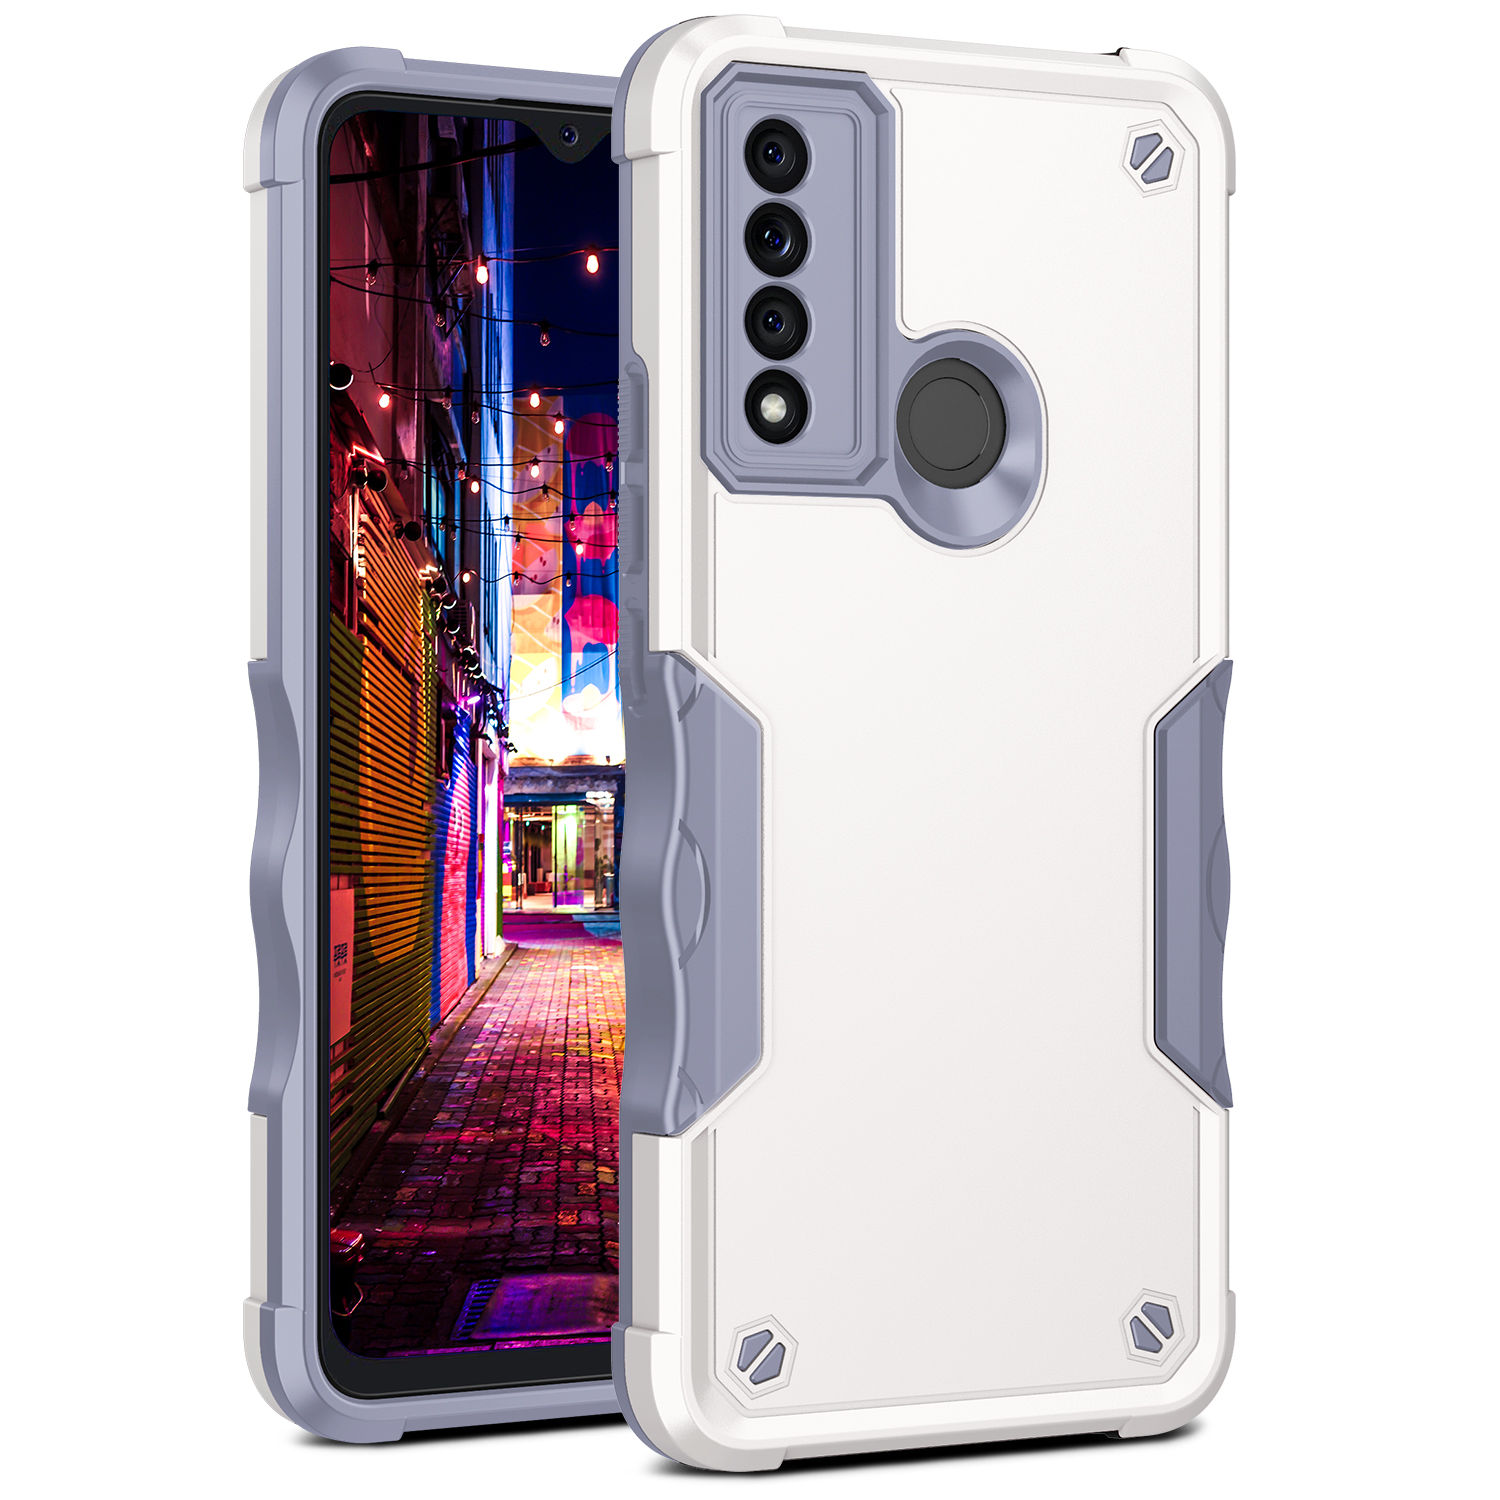 Strong Armor Grip Pattern Heavy Duty Shockproof Protective Cover Case for TCL 20 XE (White)